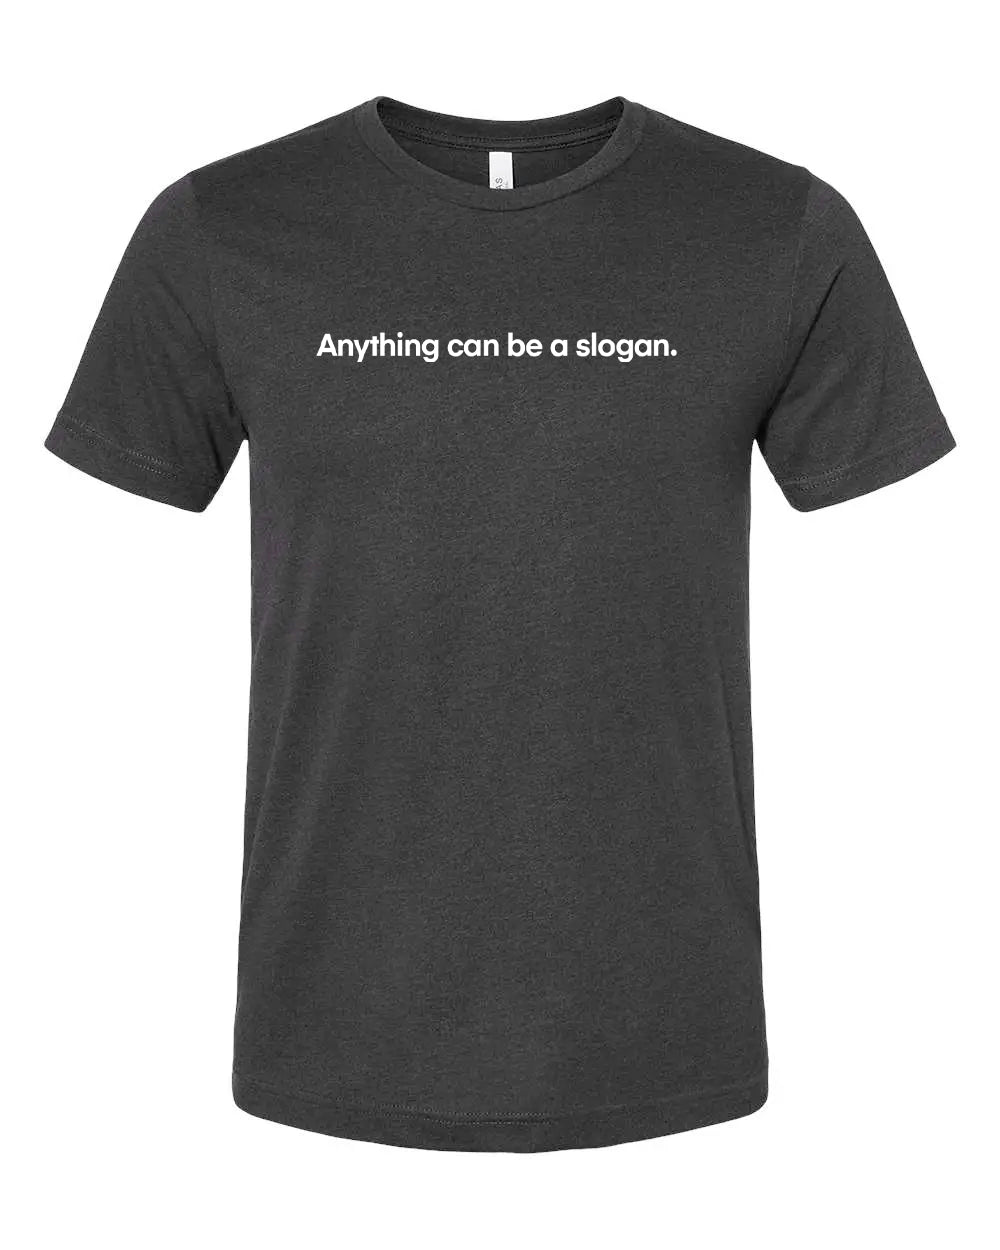 SLOGAN T-Shirts | Unsettled Apparel